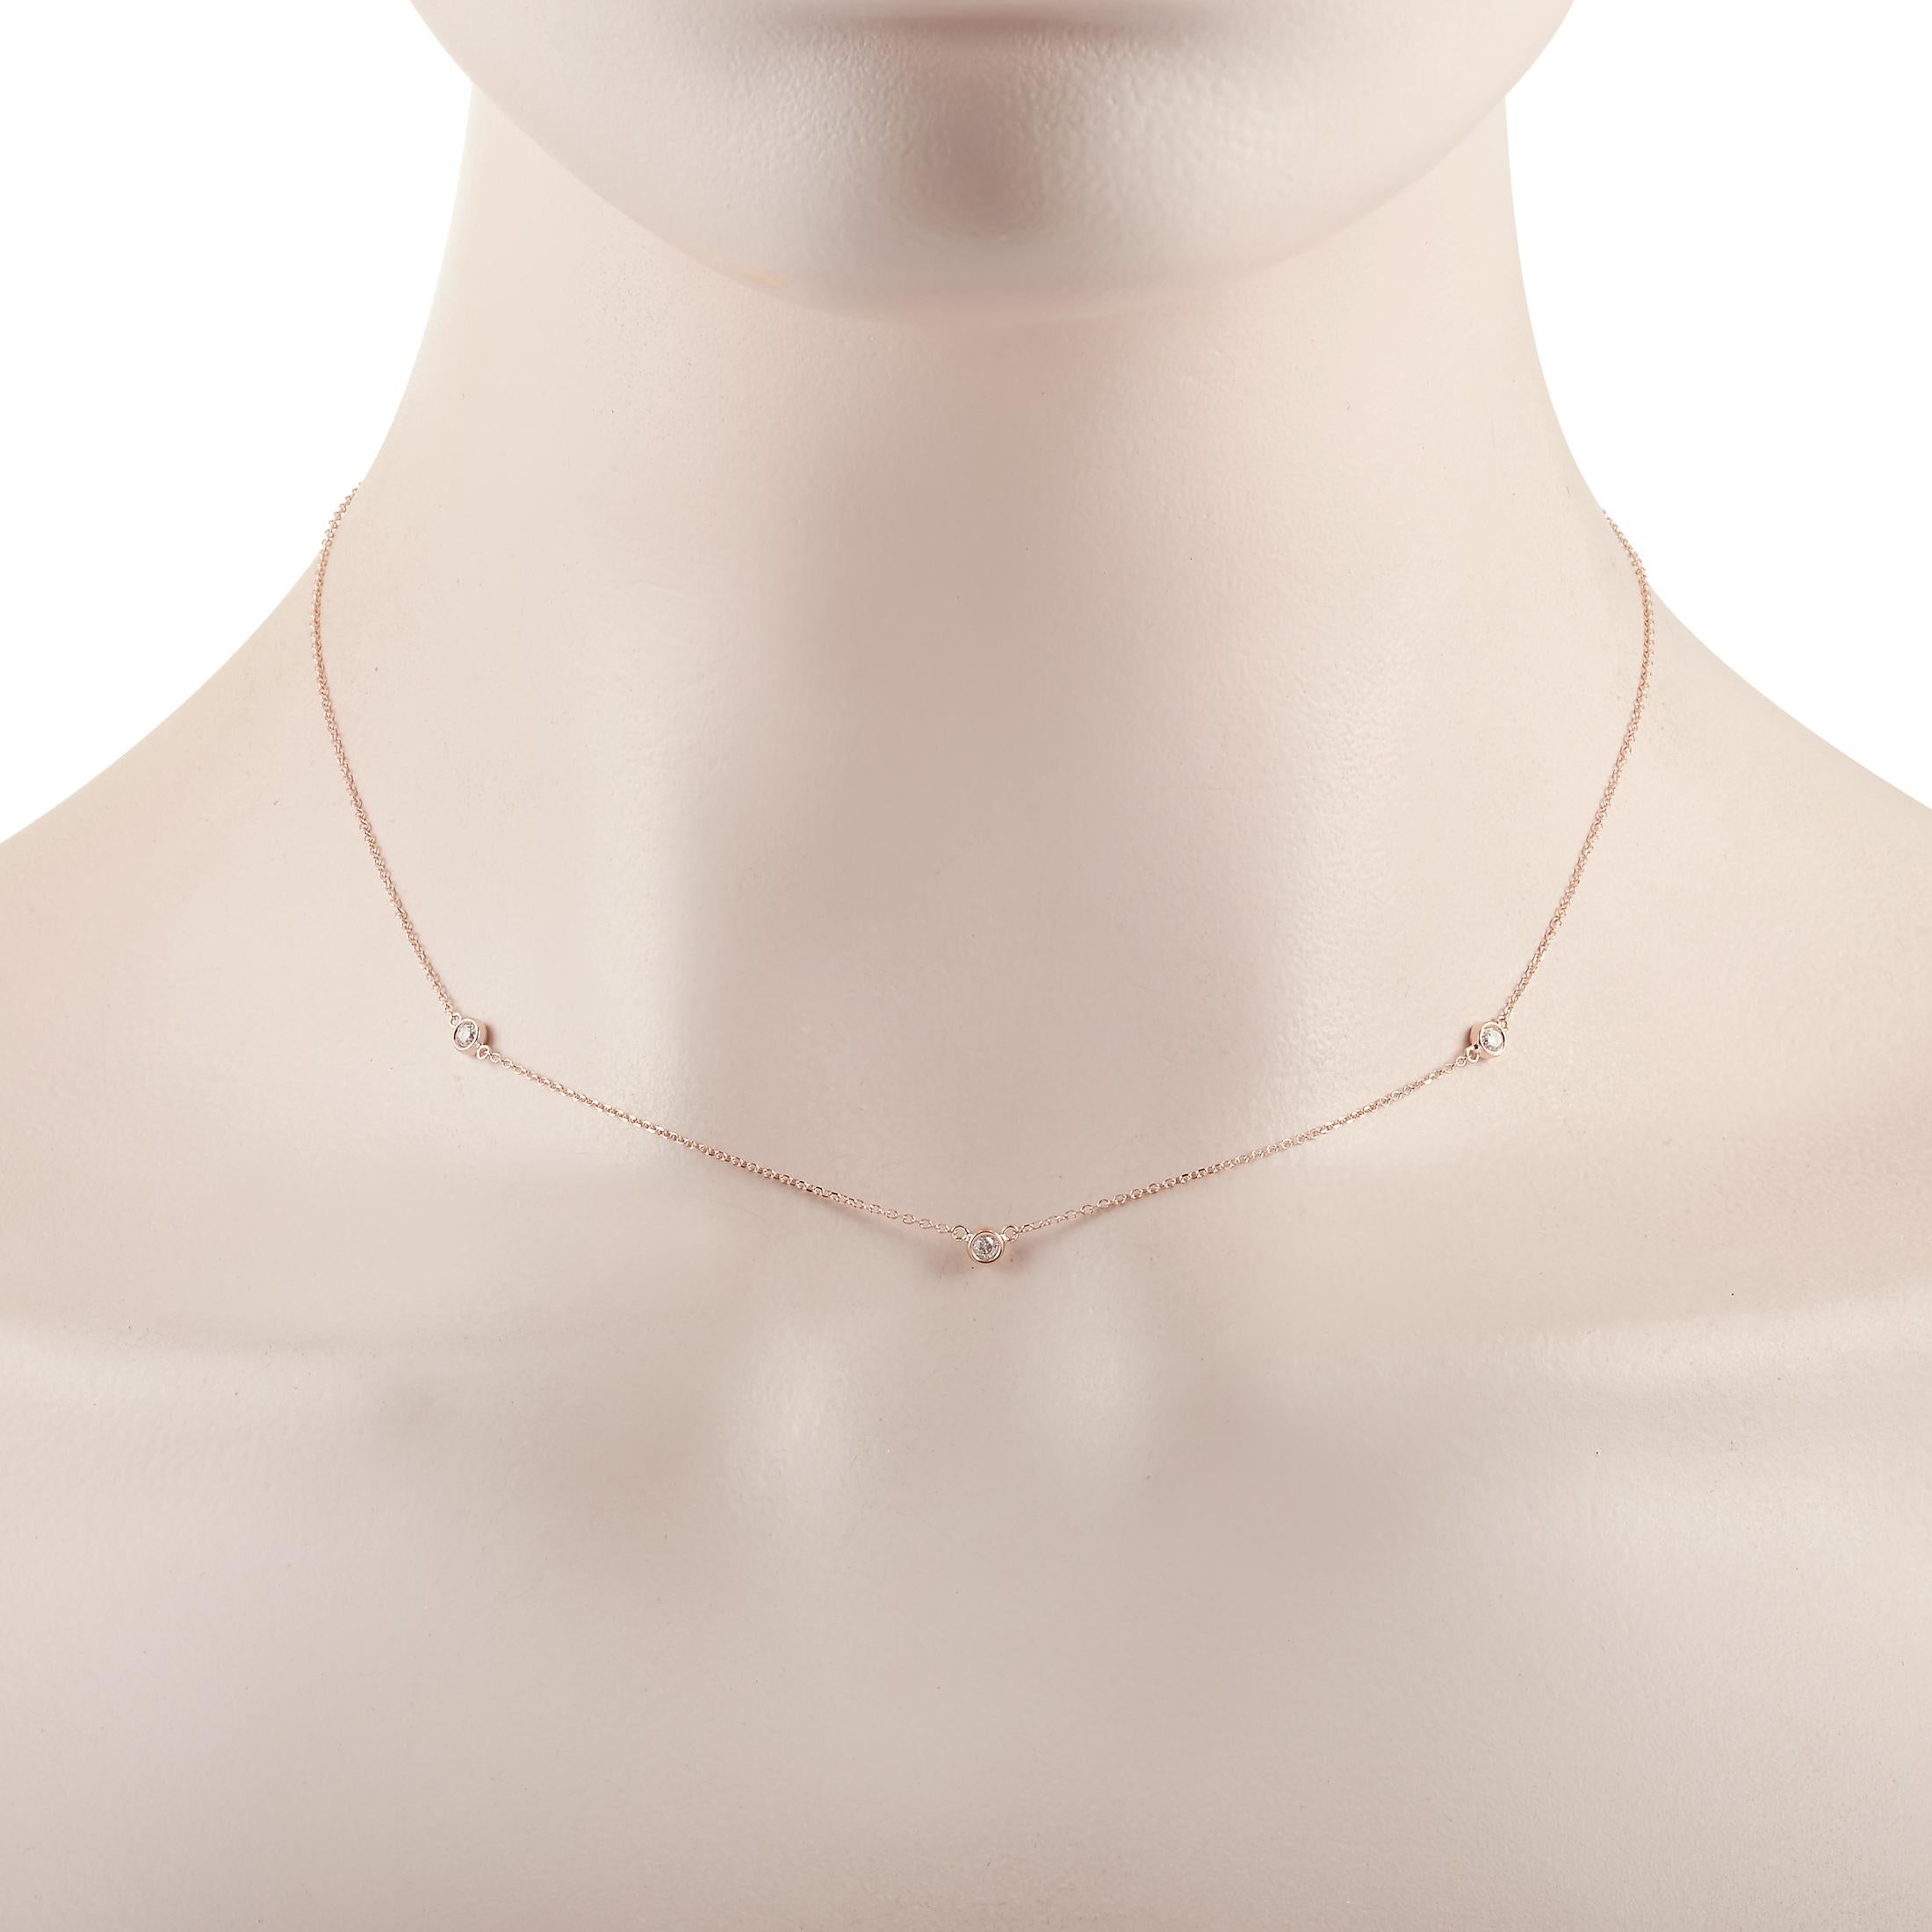 This LB Exclusive necklace is crafted from 14K rose gold and weighs 1.3 grams, measuring 16” in length. The necklace is set with diamonds that total 0.15 carats.
 
 Offered in brand new condition, this jewelry piece includes a gift box.
